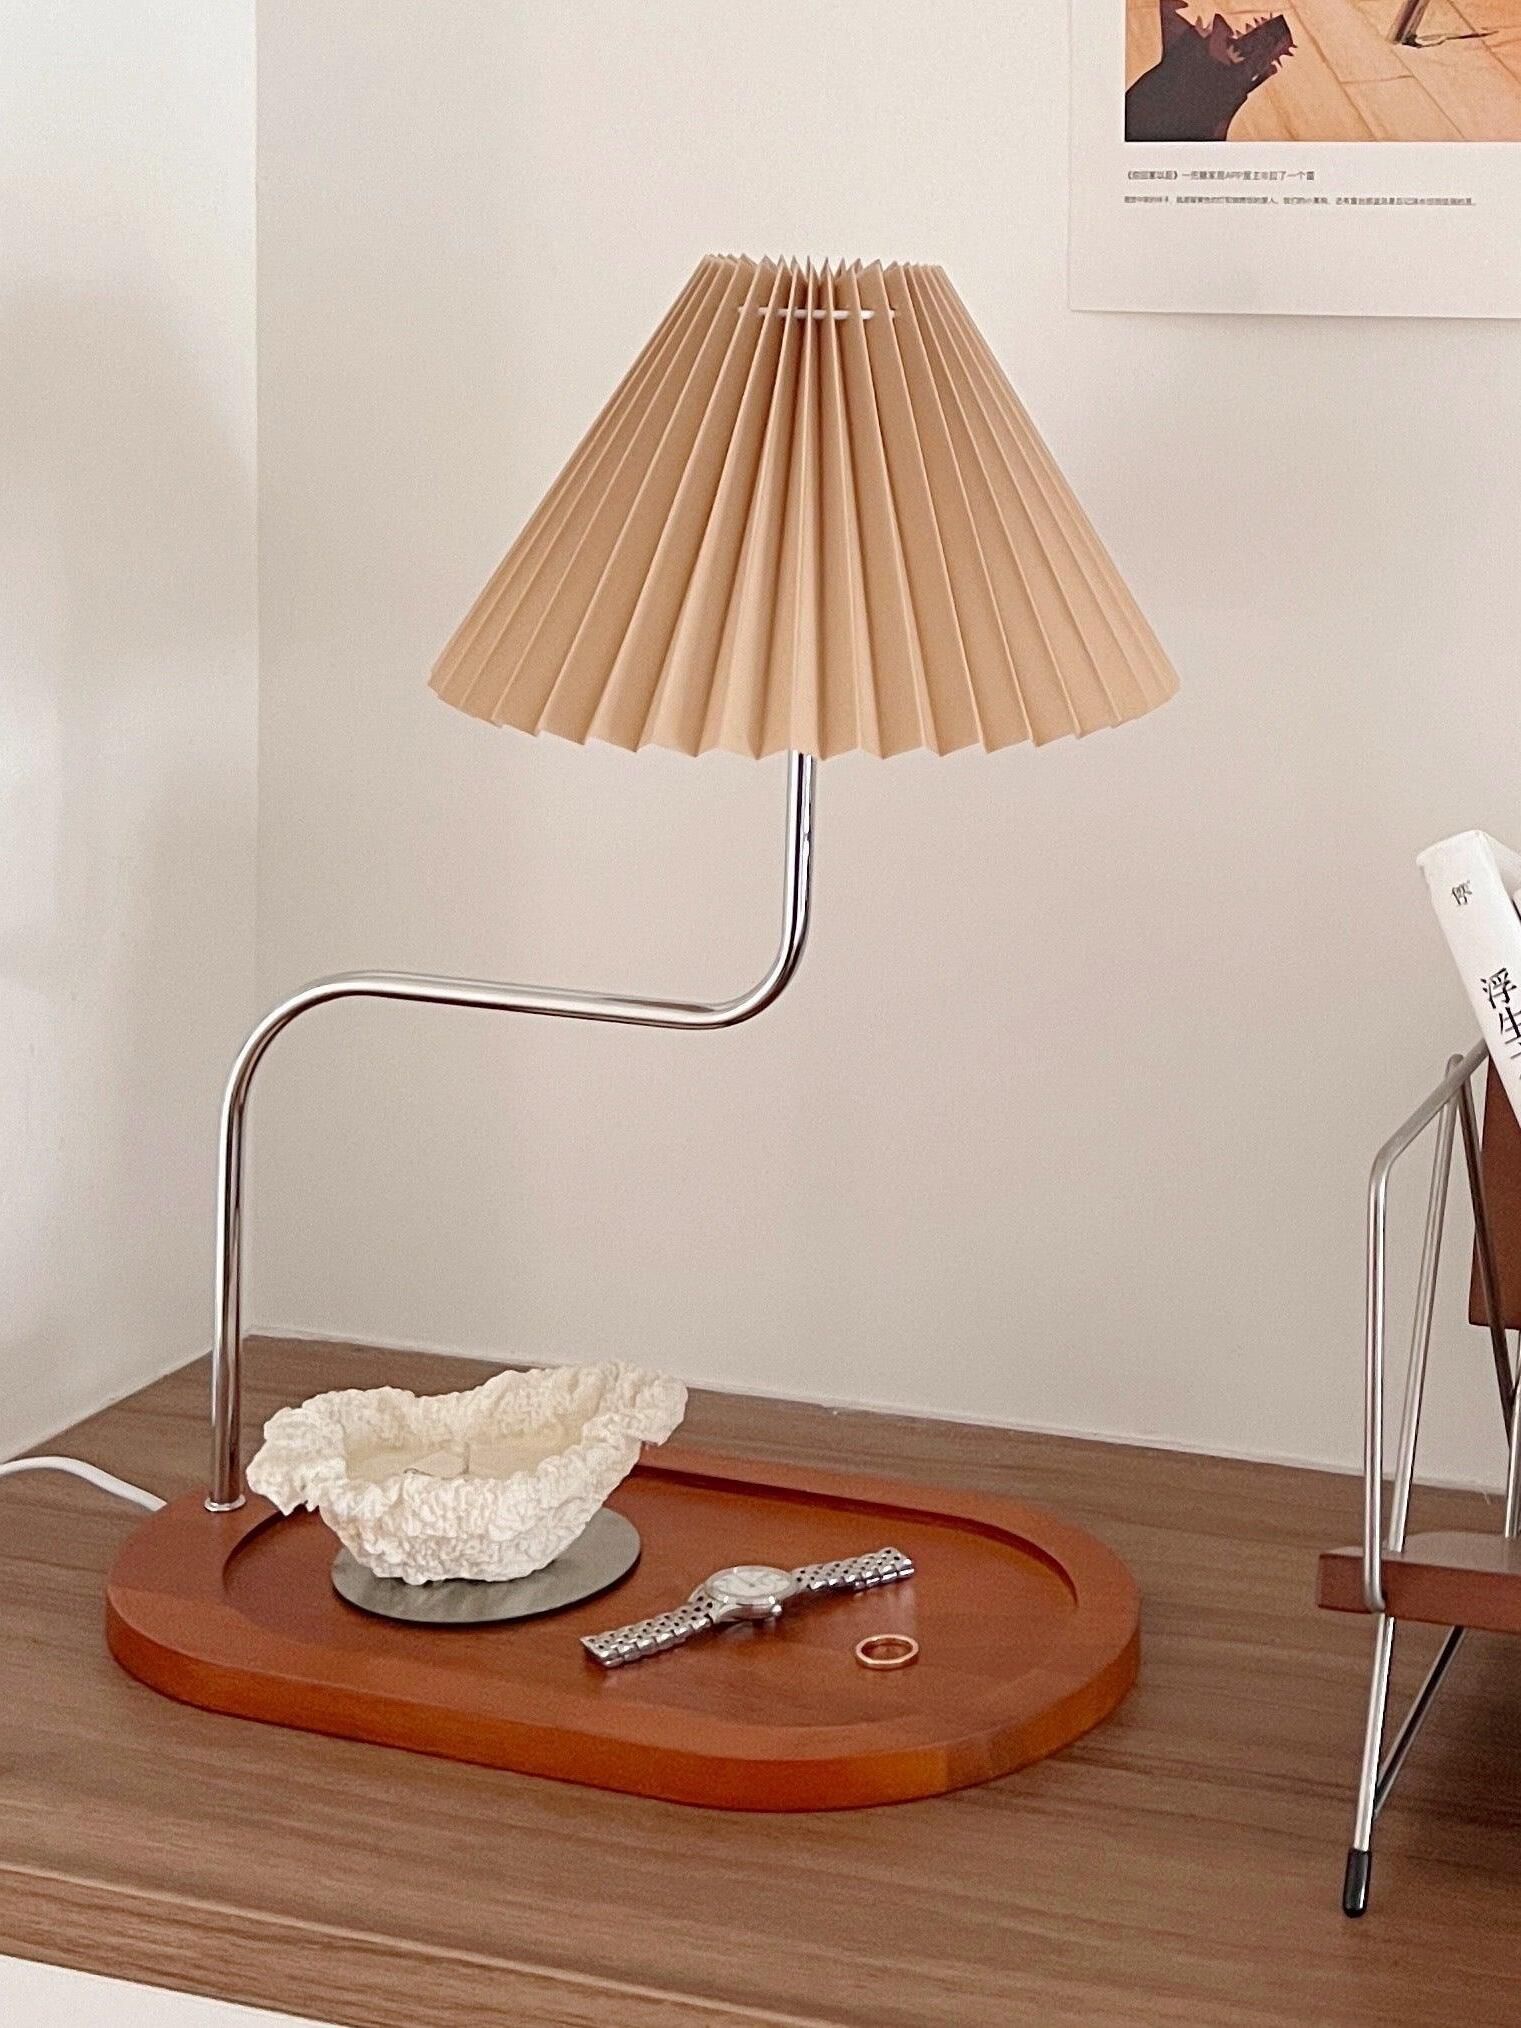 Bedroom Table Lamps Illuminate Your Sleep Space with Stylish Lighting Options